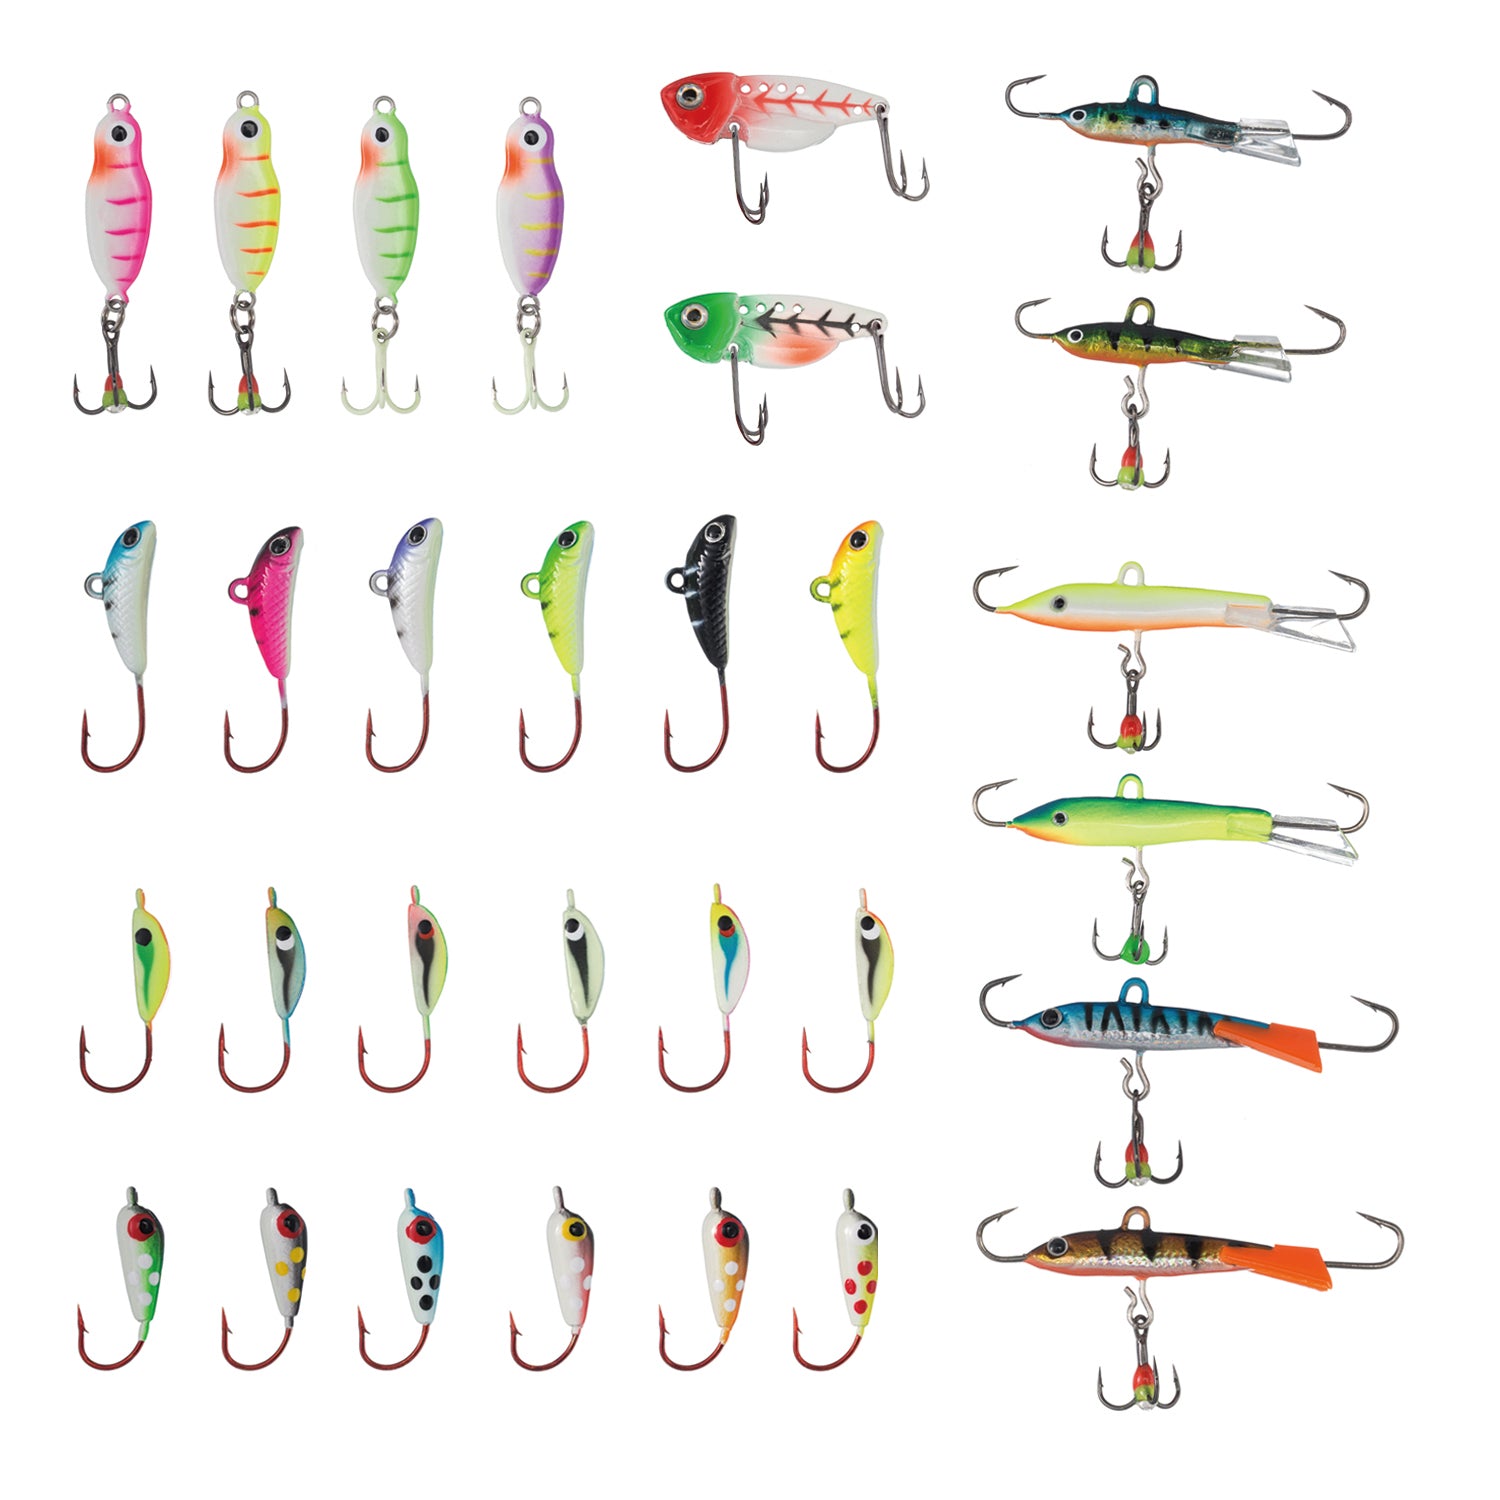 EAGLE CLAW 19 PIECE ICE FISHING LURE KIT #IKGNL19 NEW With Flashlight!